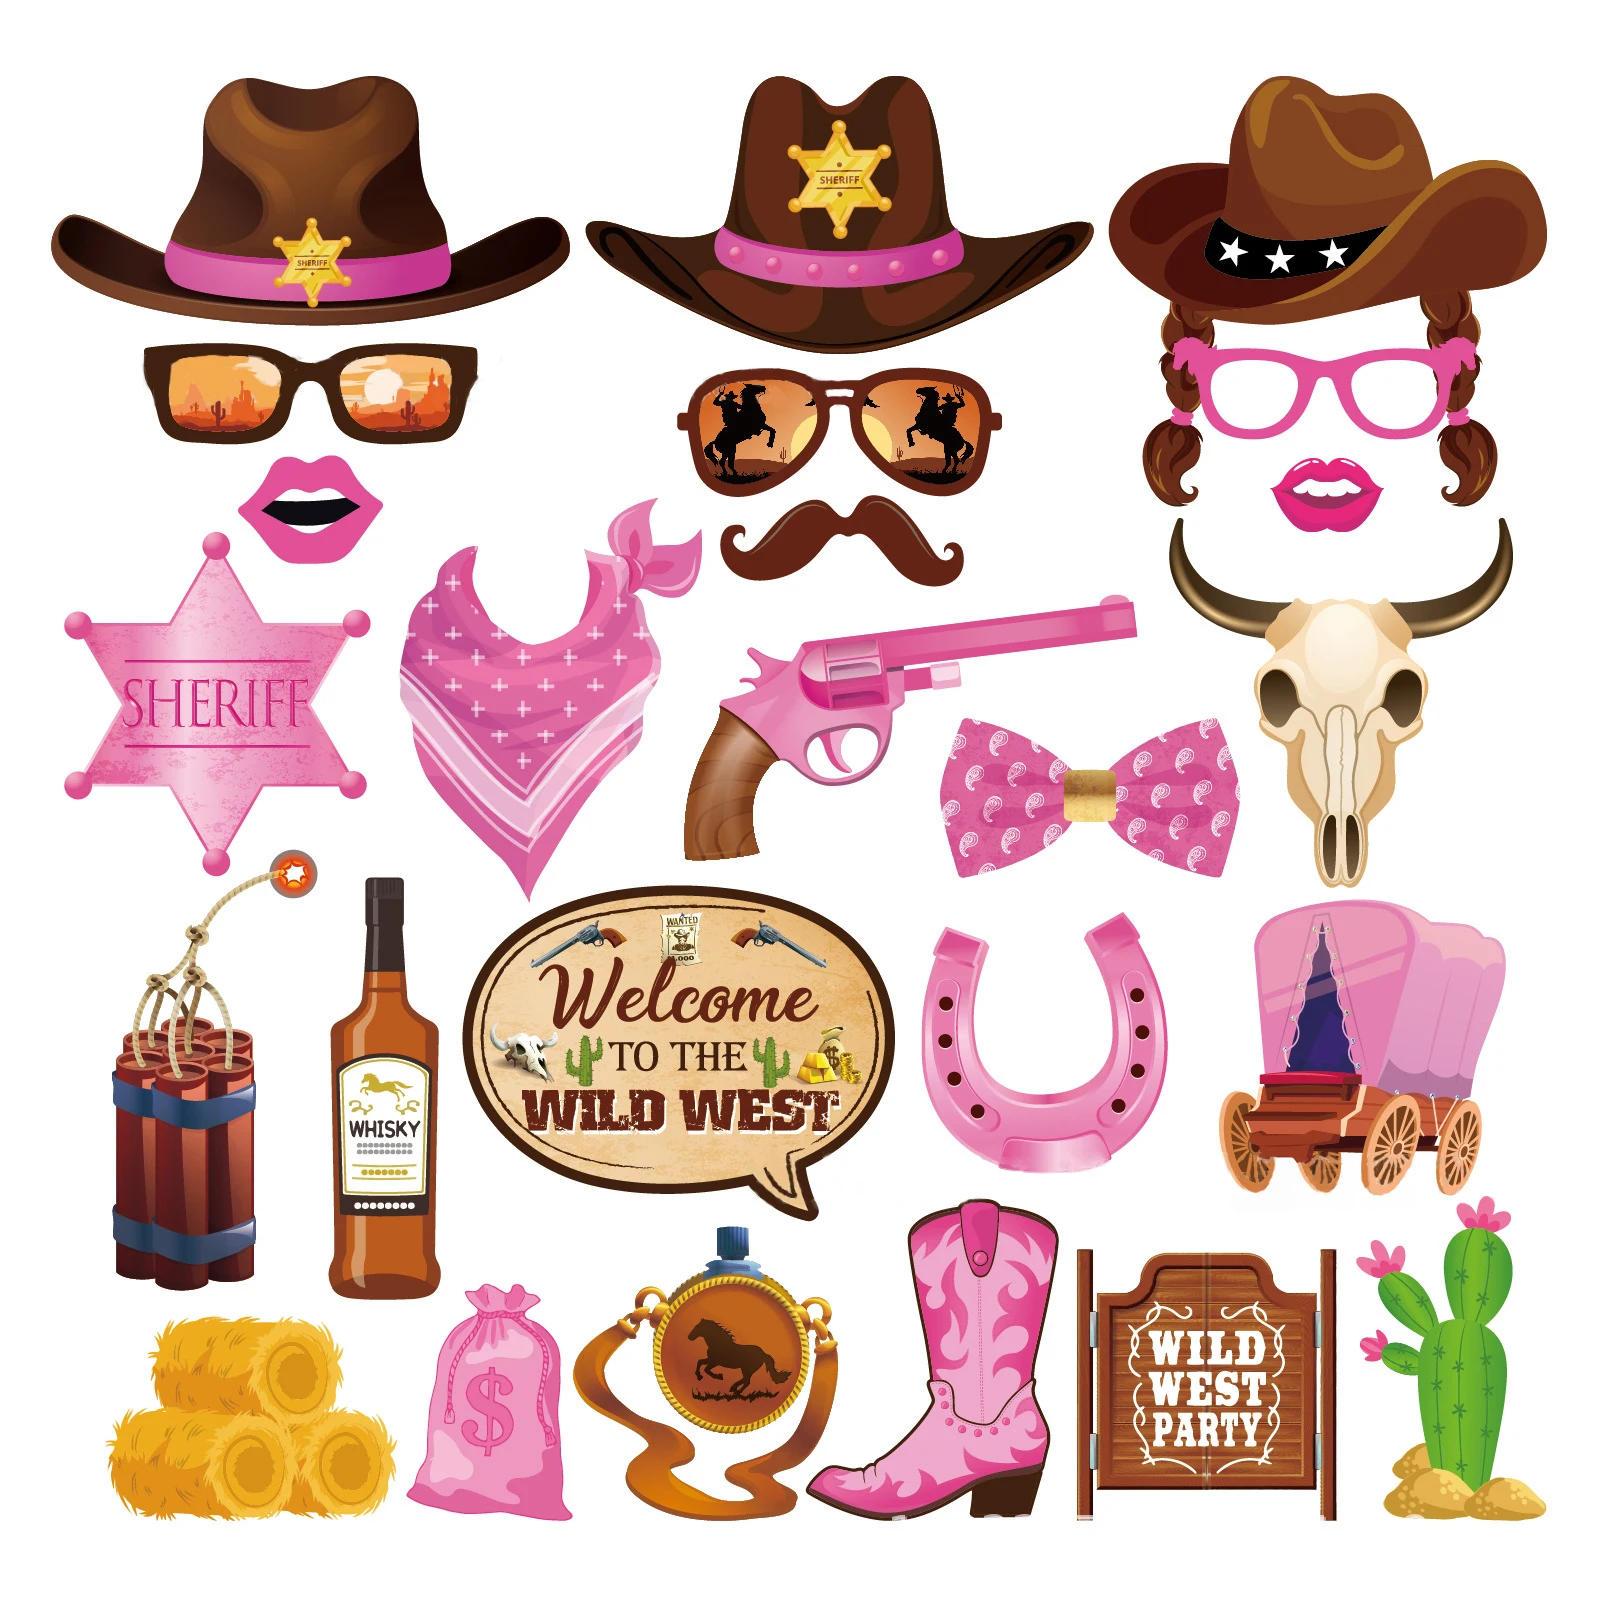 JOYMEMO 25PCS Western Cowgirl Theme Photo Booth Tools Welcome To The Wild West DIY Photo Props Girl Birthday Party Supplies